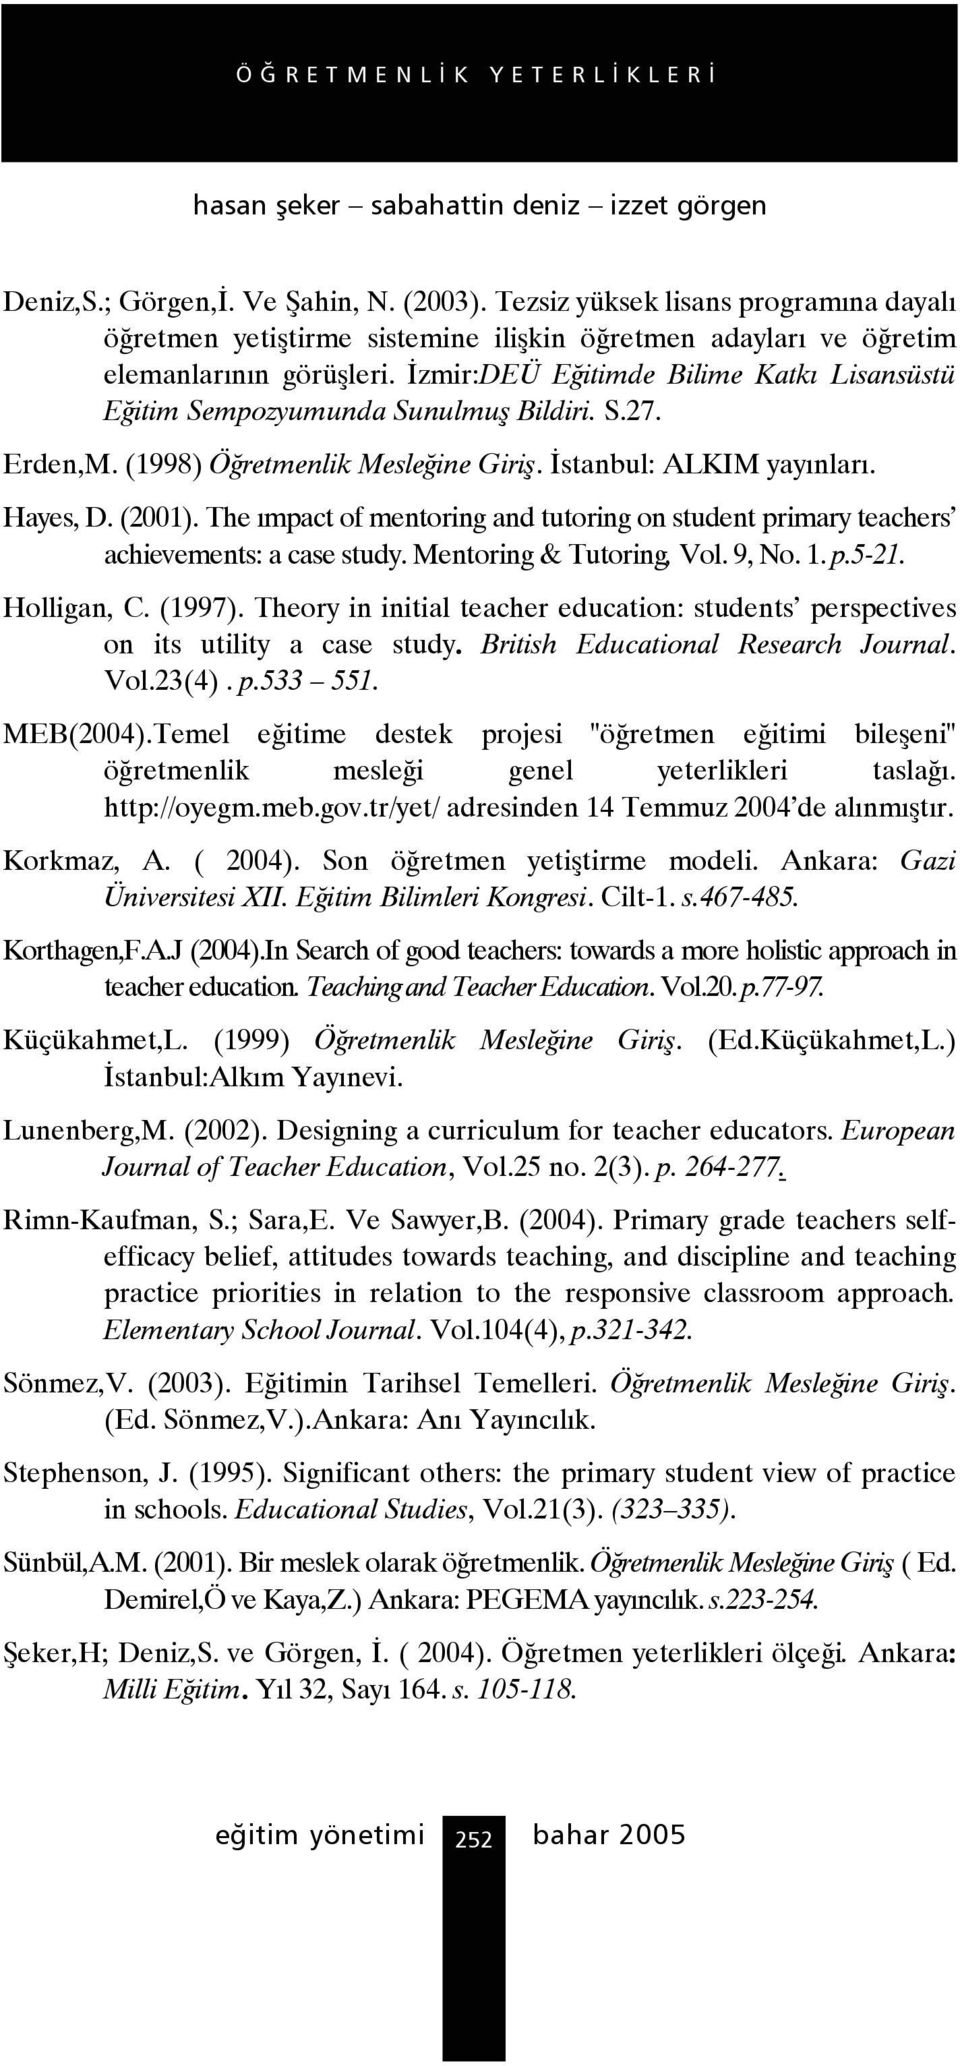 The ımpact of mentoring and tutoring on student primary teachers achievements: a case study. Mentoring & Tutoring, Vol. 9, No. 1. p.5-21. Holligan, C. (1997).